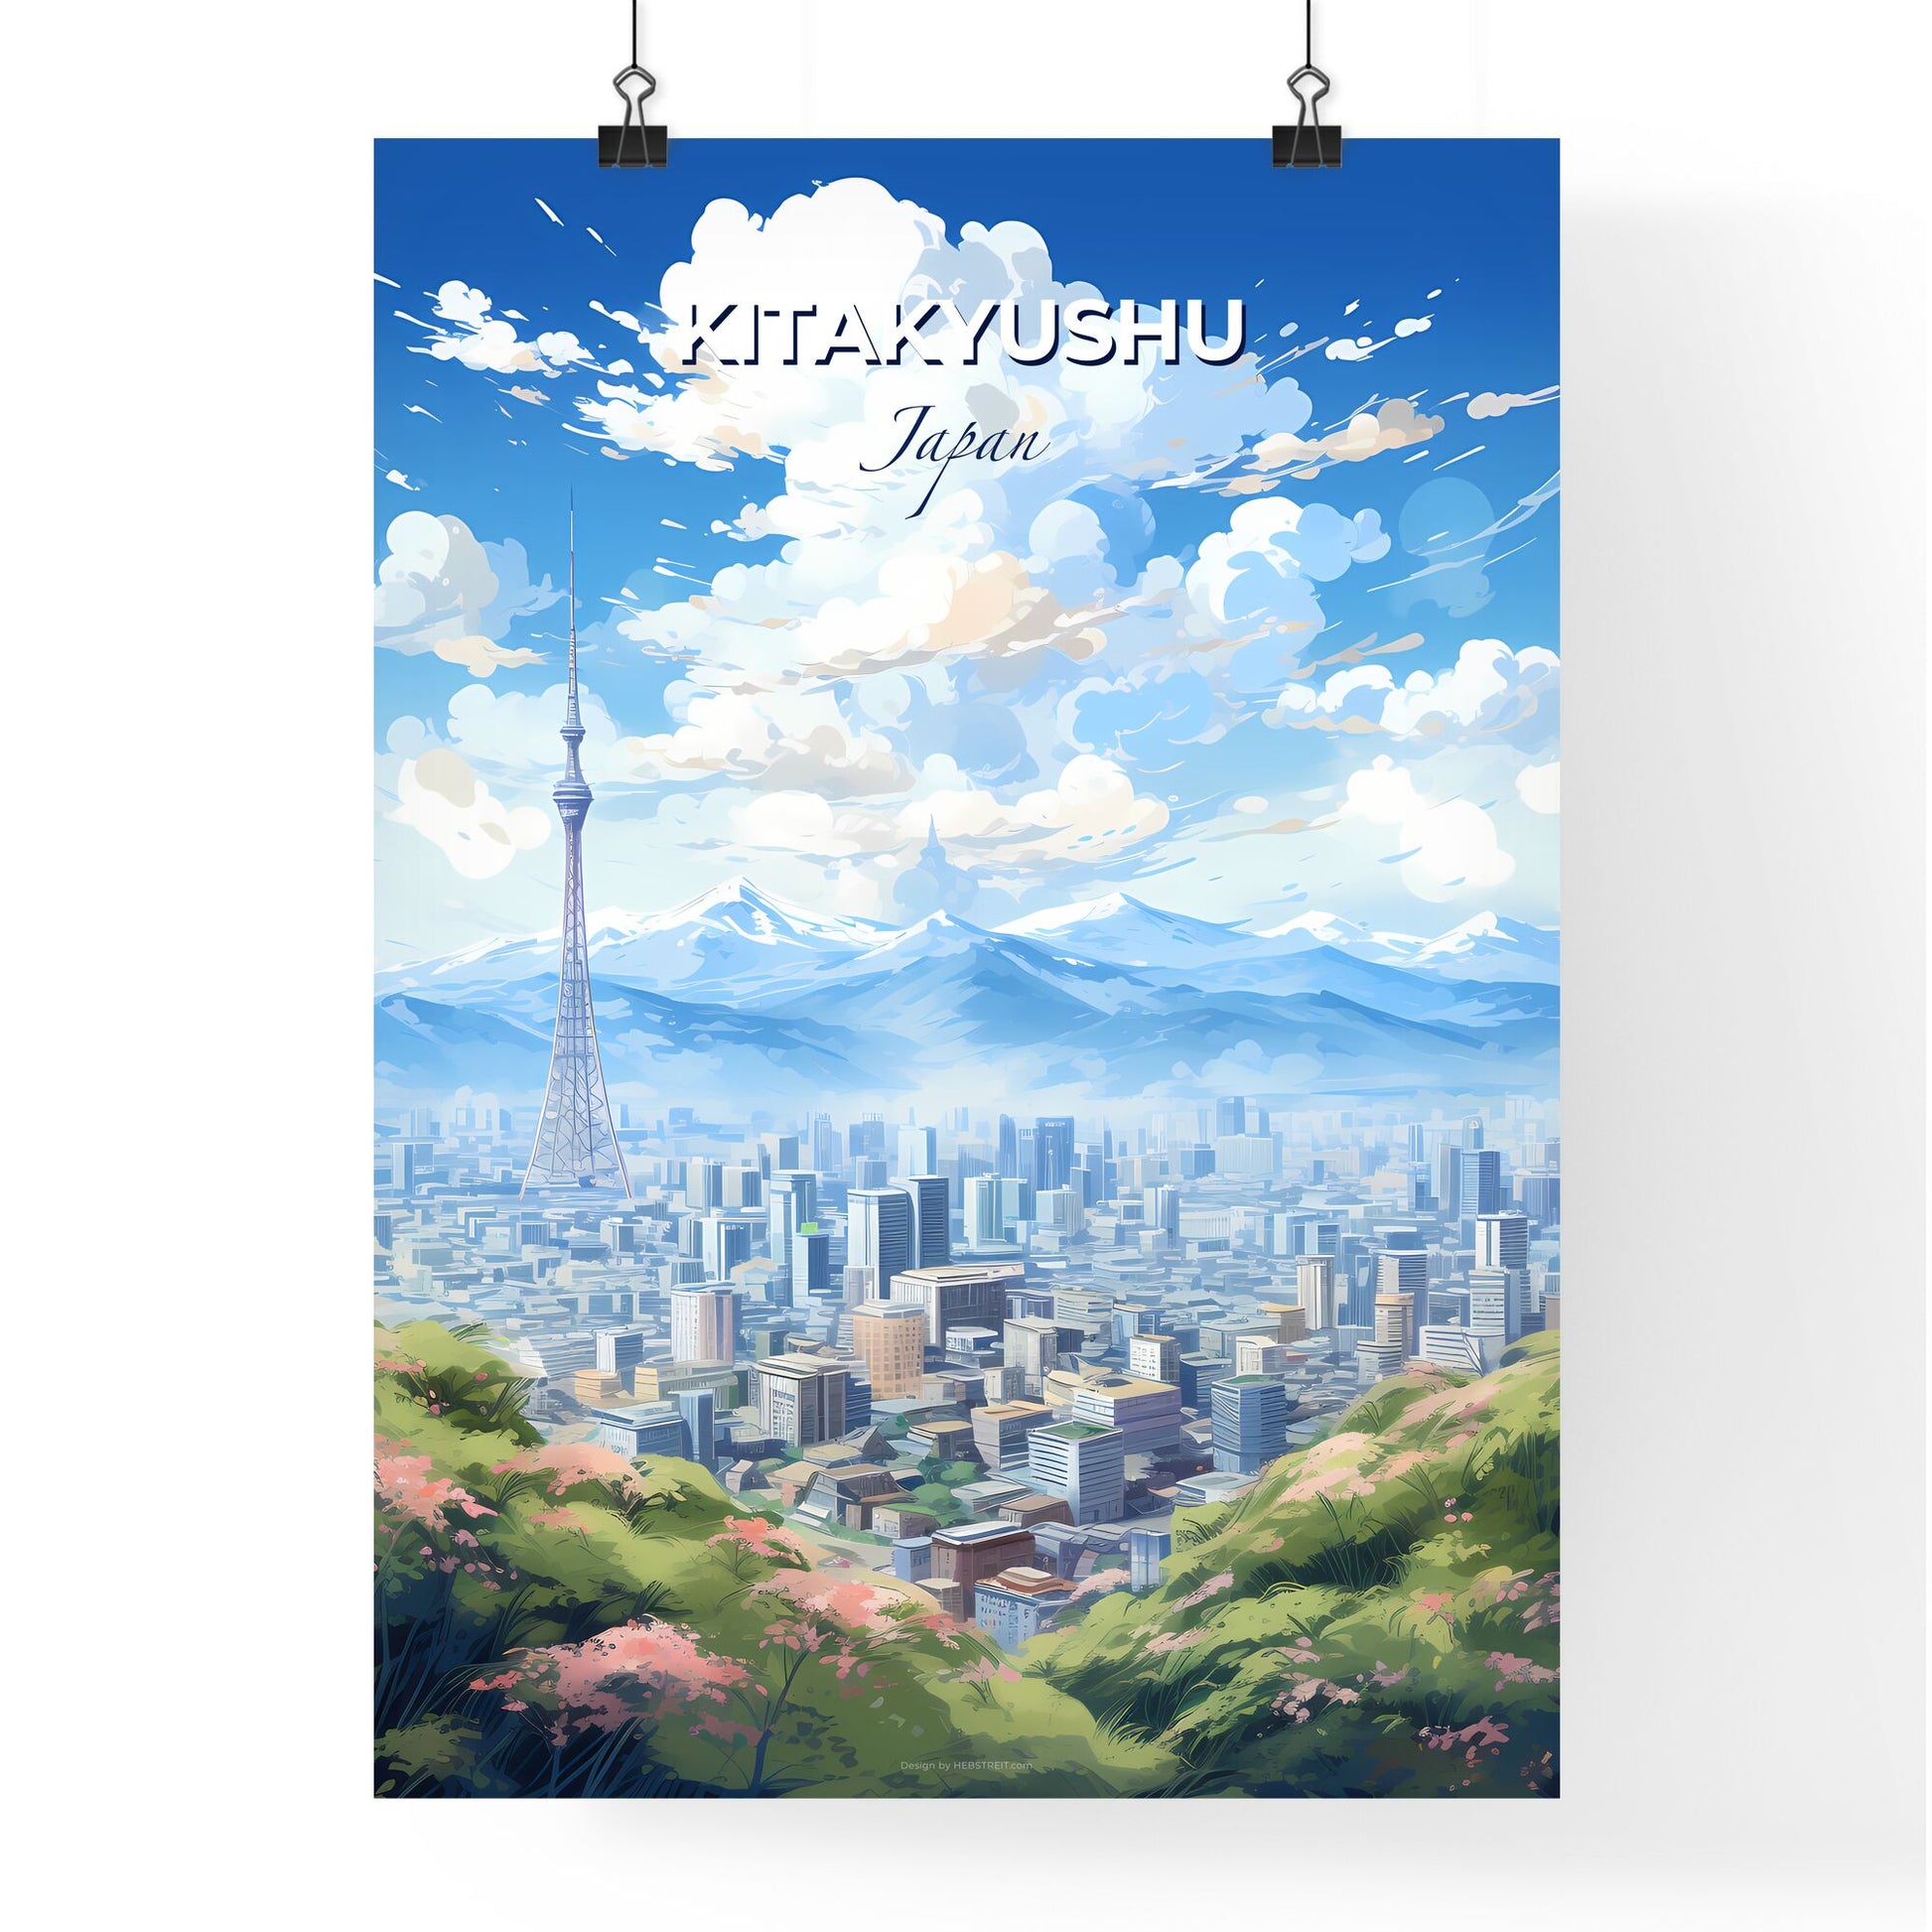 Kitakyushu Japan Skyline - A City Landscape With Mountains And A Tower - Customizable Travel Gift Default Title